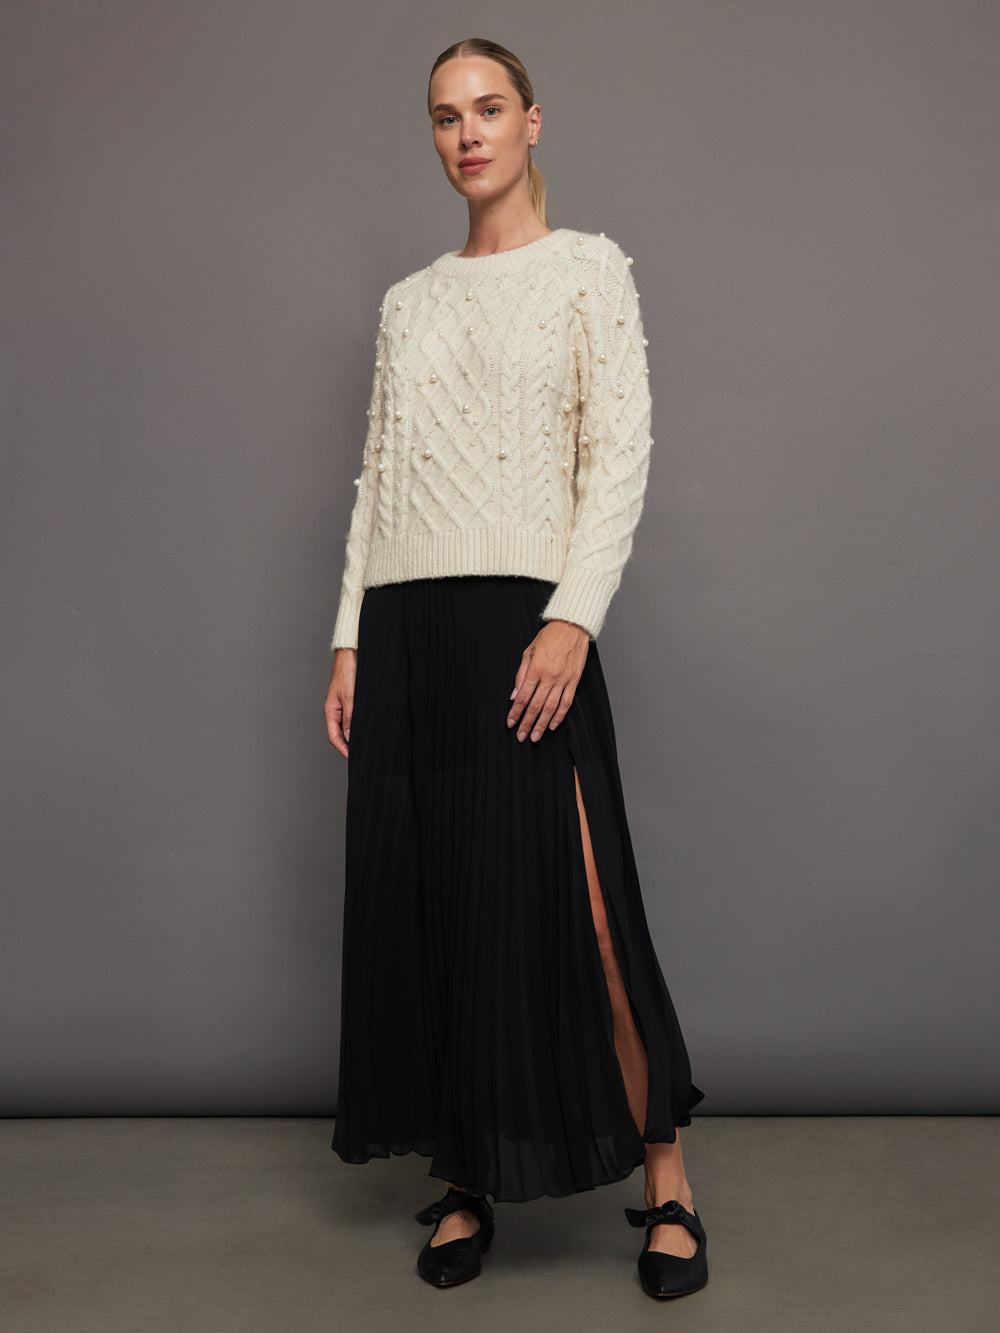 Pearl Embellished Sweater - Winter White